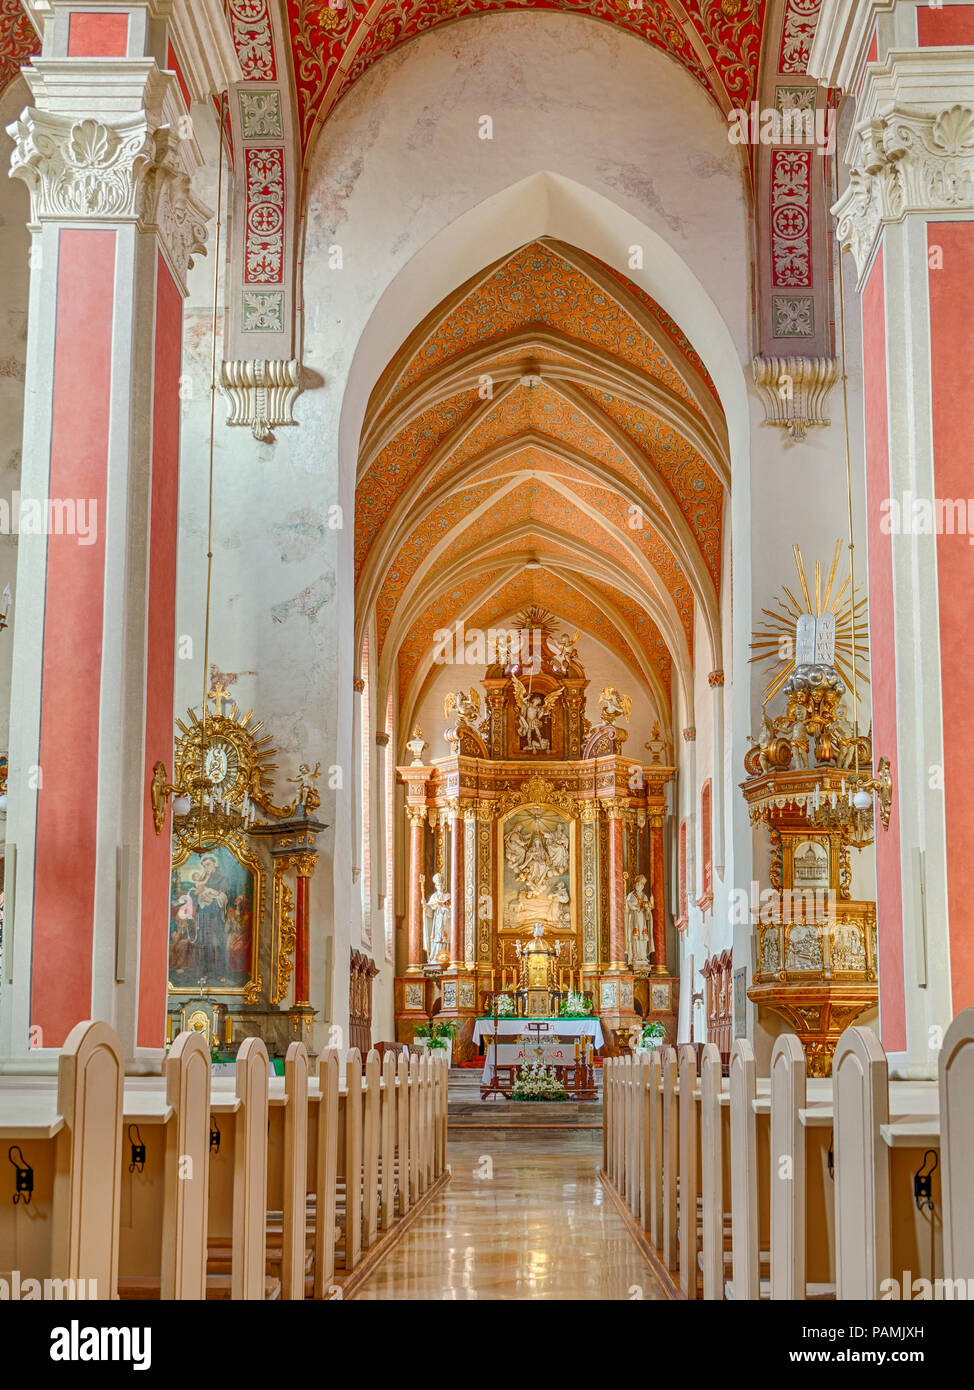 Interior of the Franciscan church of the Holy Trinity and the Assumption of the Blessed Virgin Mary in Opole, Poland Stock Photo